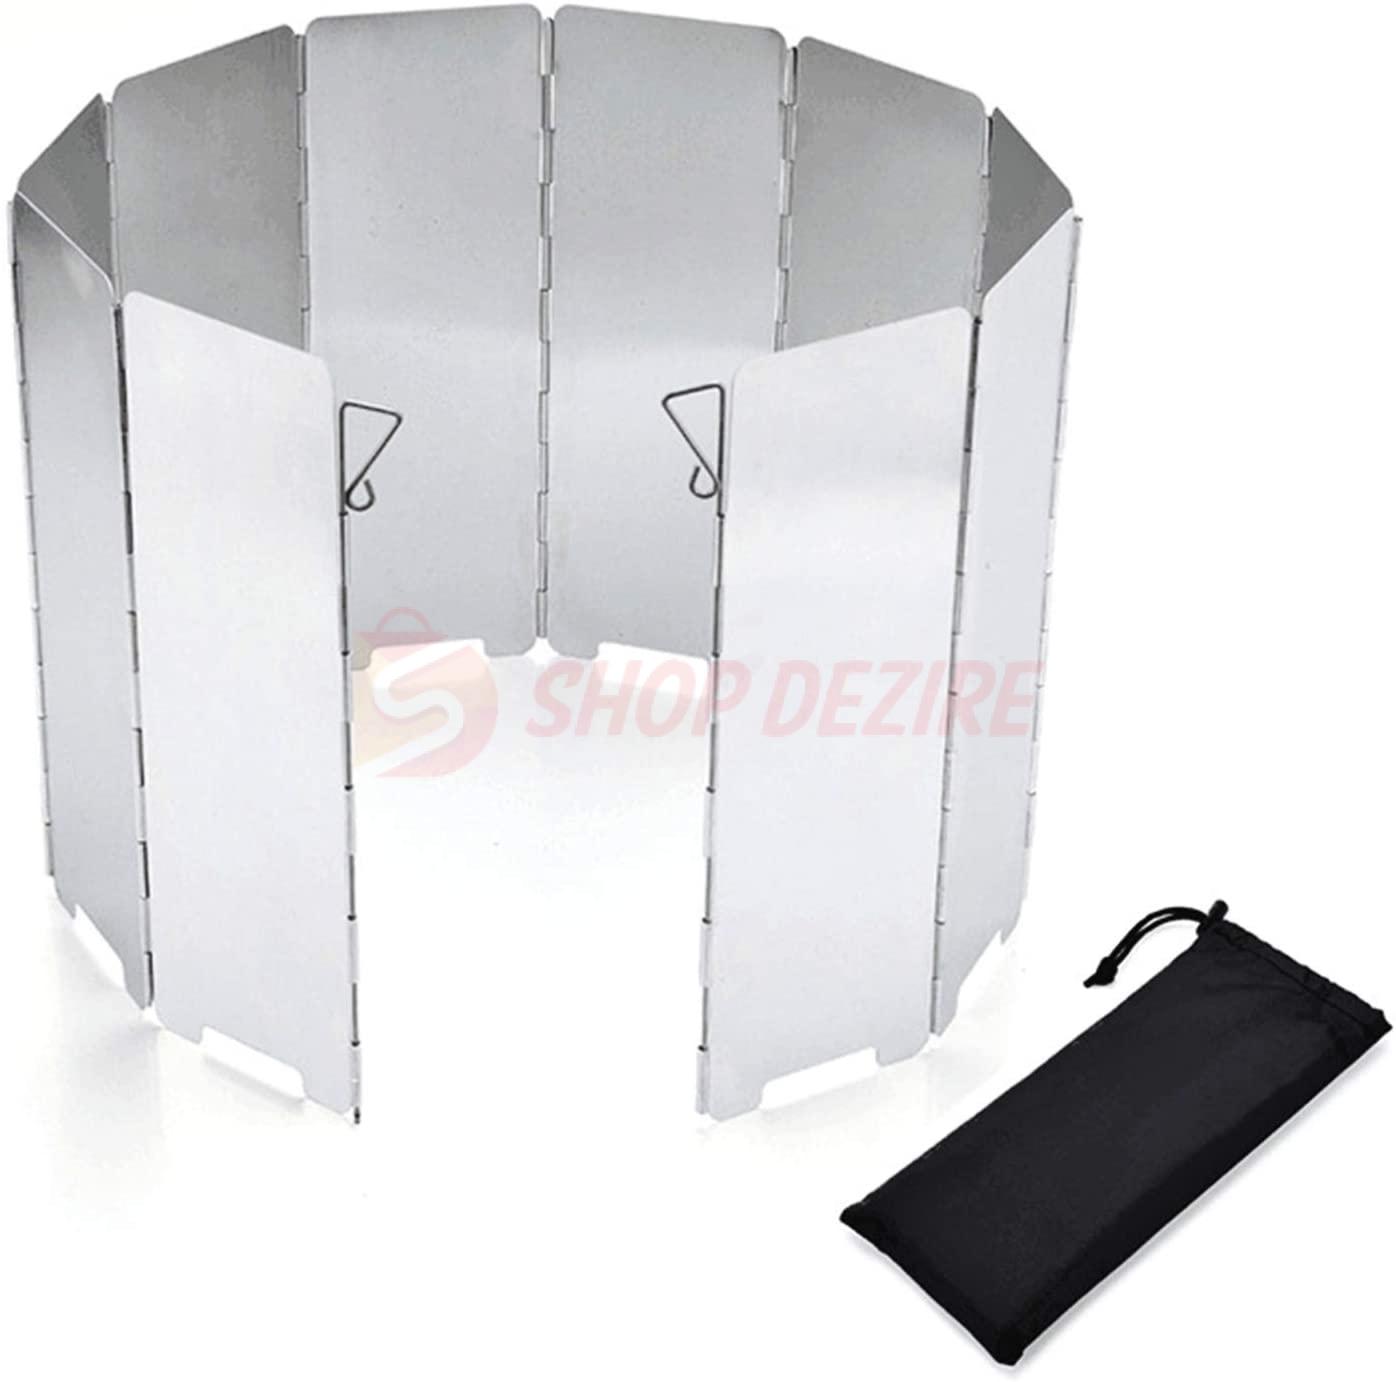 Foldable Outdoor Gas Stove Wind Shield